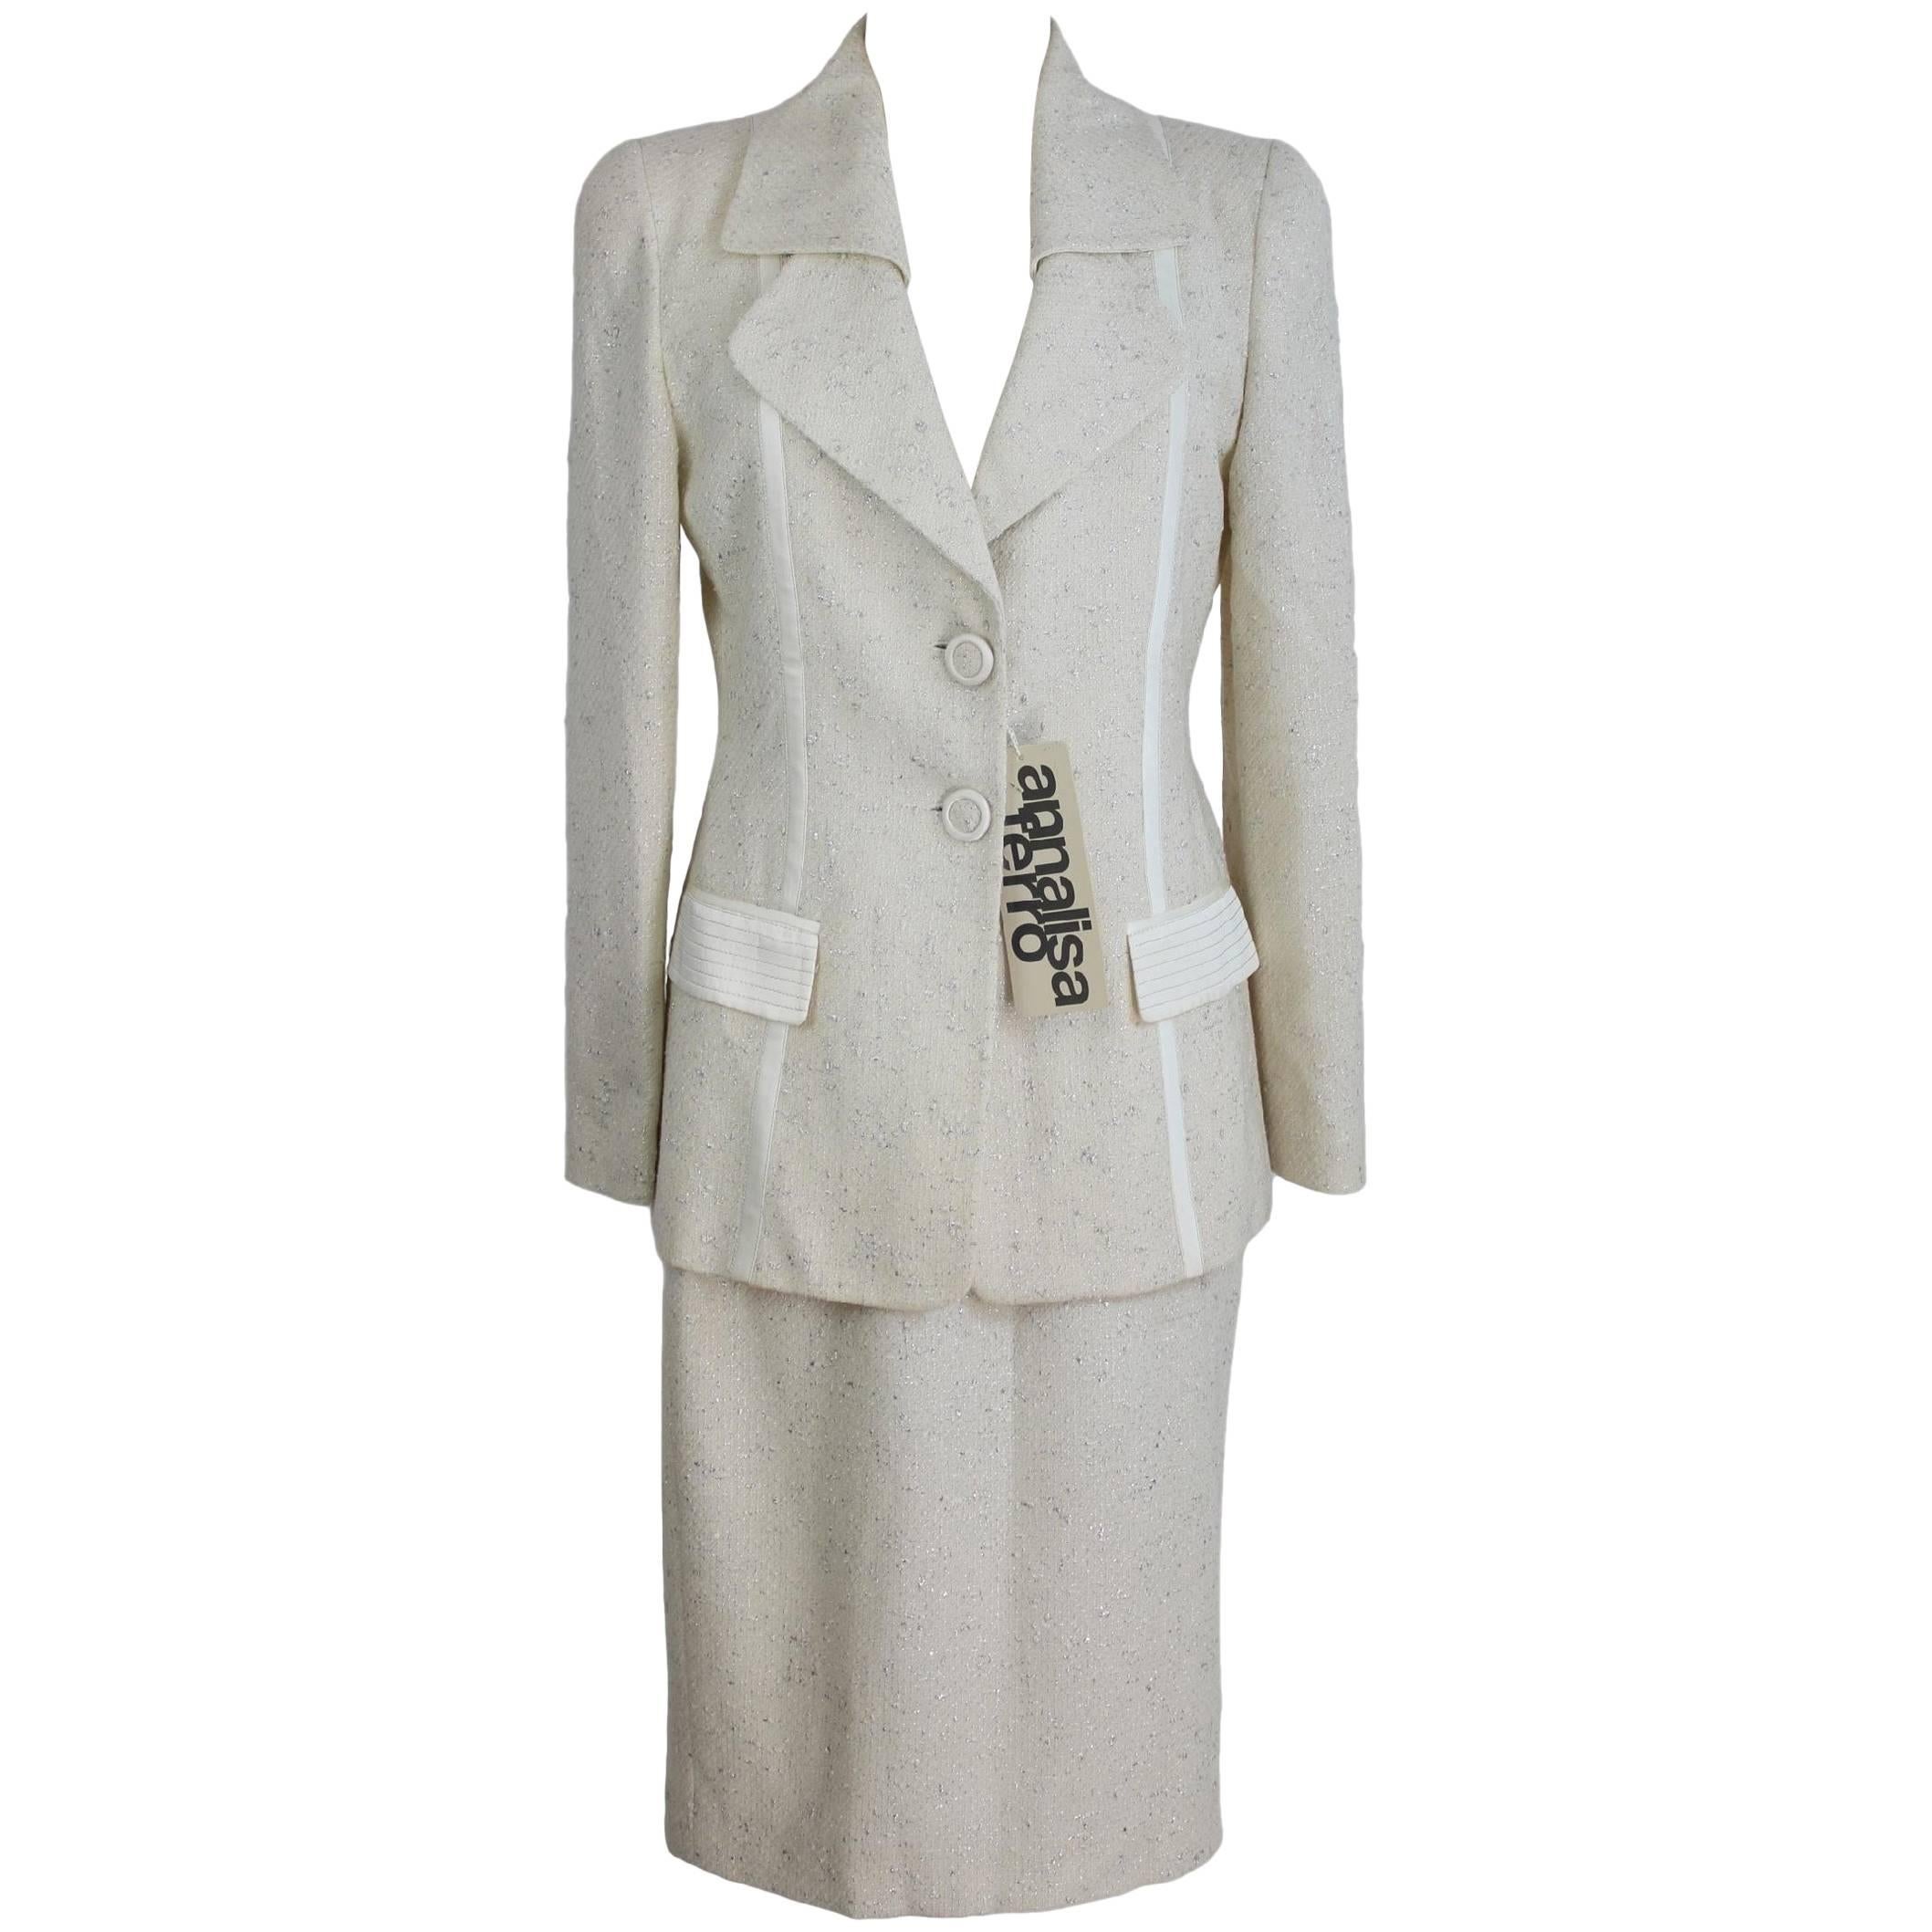 Annalisa Ferro Set Dress Wool and Cotton White Silver Italian Skirt Suit, 1980s For Sale